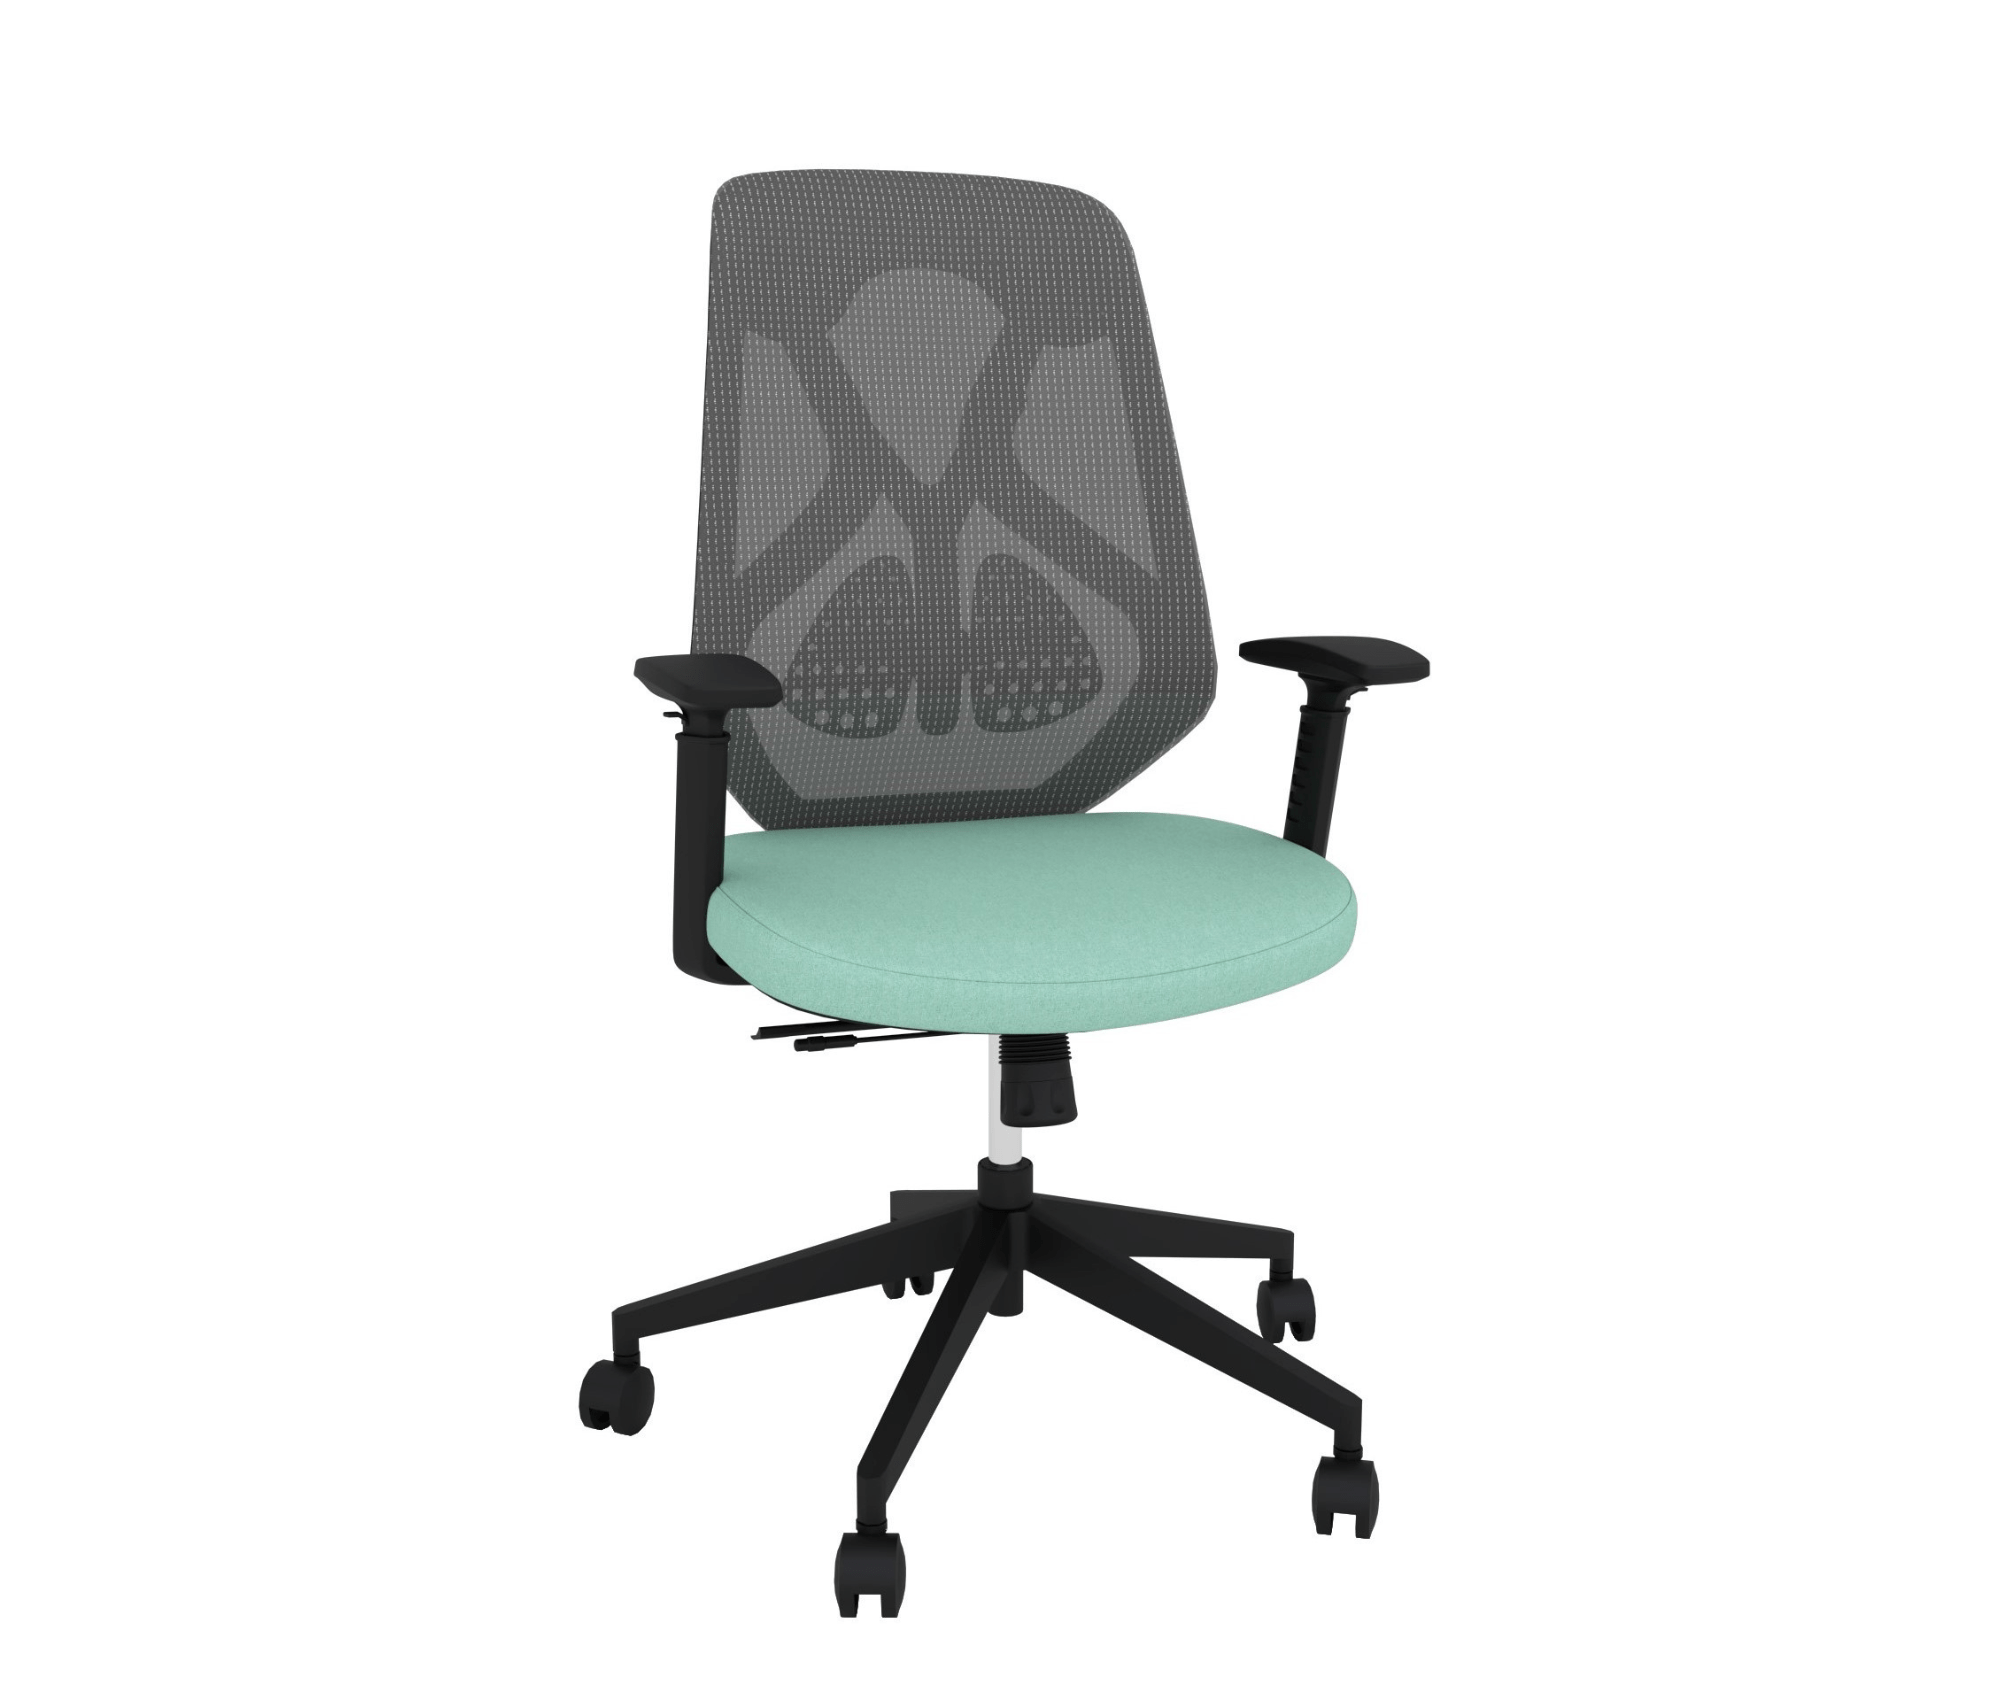 Ergonomic Chair | Office Chair with Adjustable Arms Porvata Office Chairs Sea Foam Green